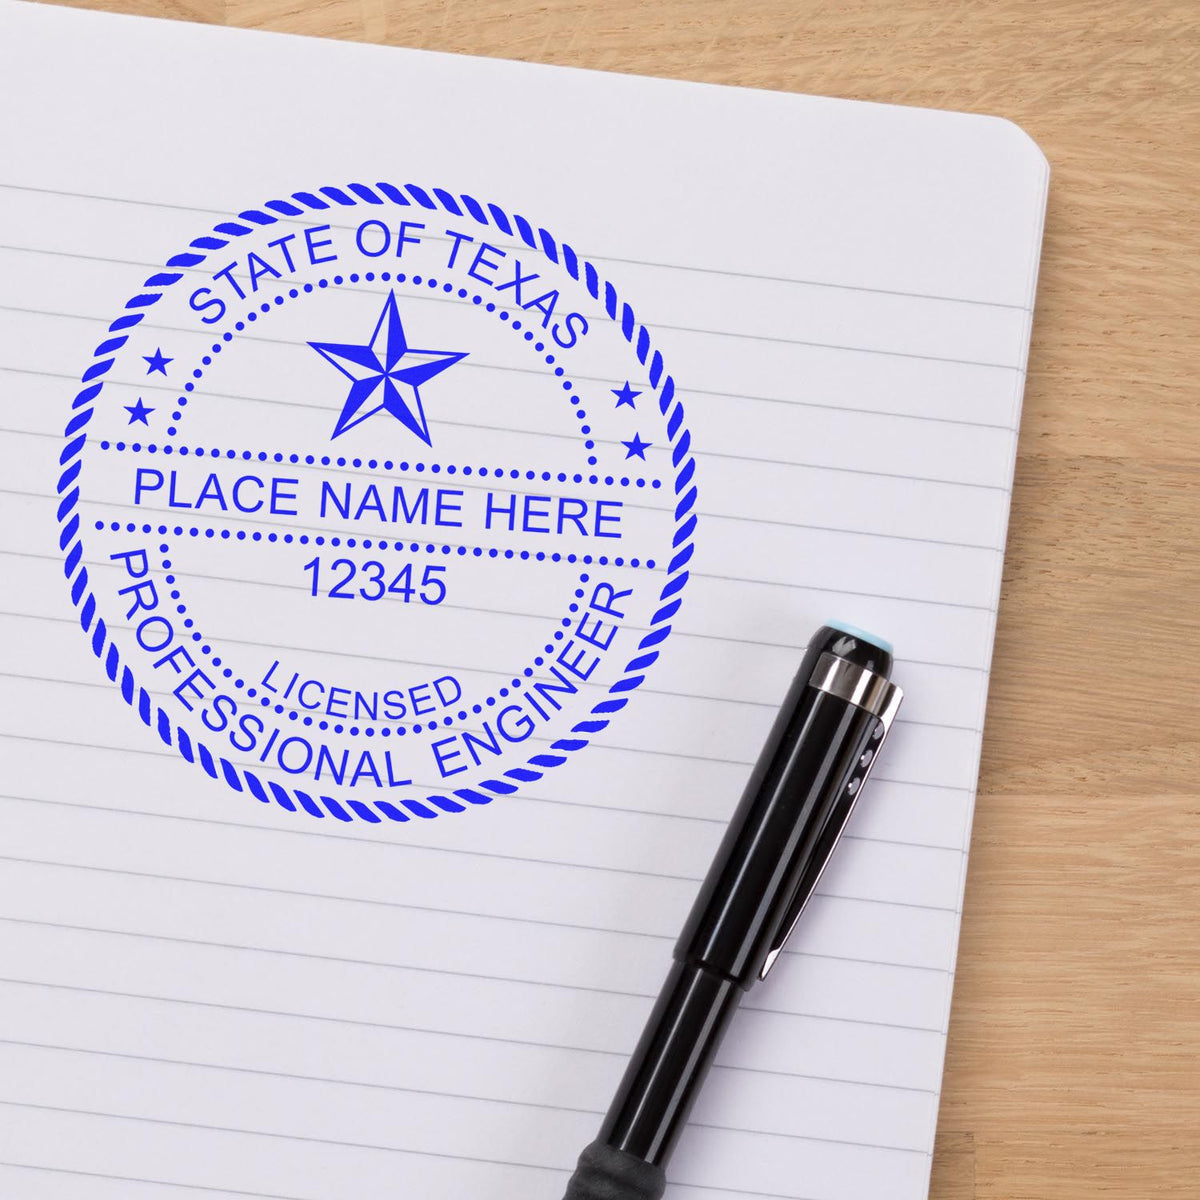 The Digital Texas PE Stamp and Electronic Seal for Texas Engineer stamp impression comes to life with a crisp, detailed photo on paper - showcasing true professional quality.